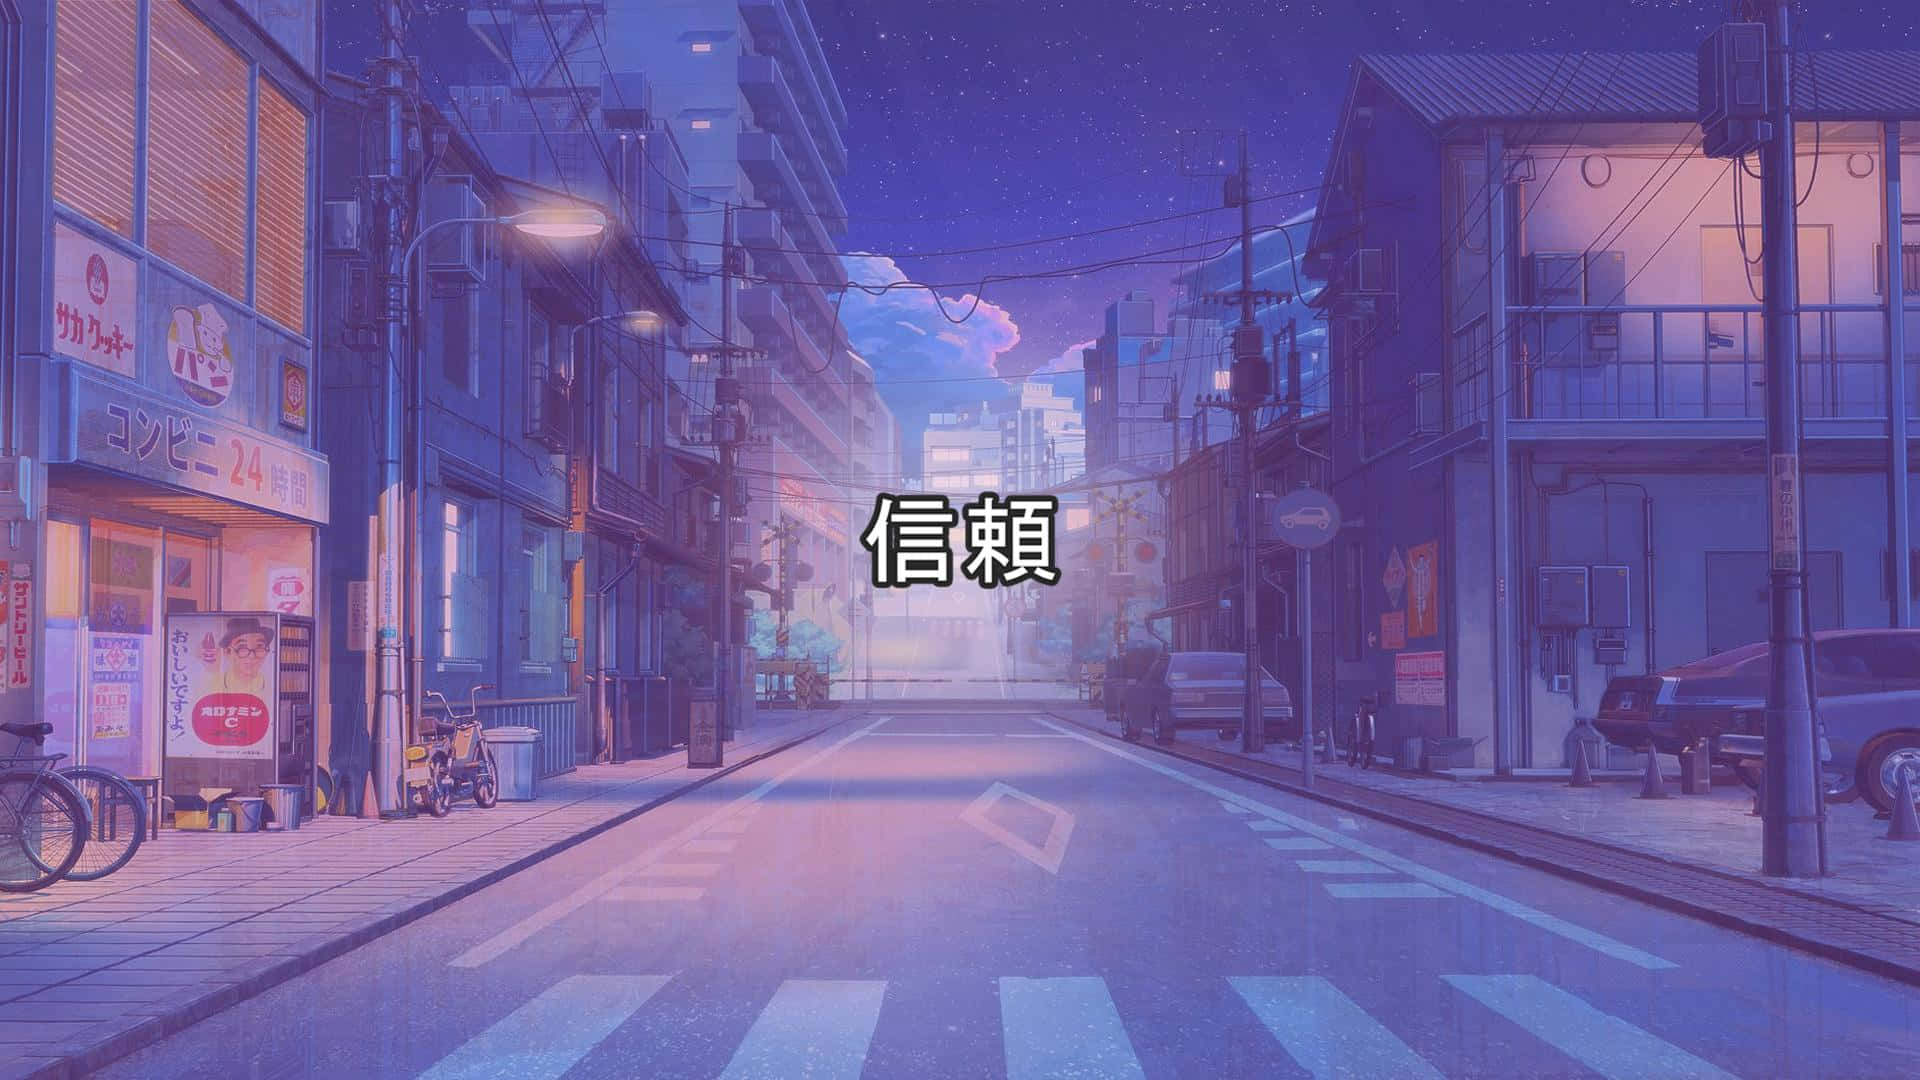 Enjoy the calm pattern of a lo-fi background